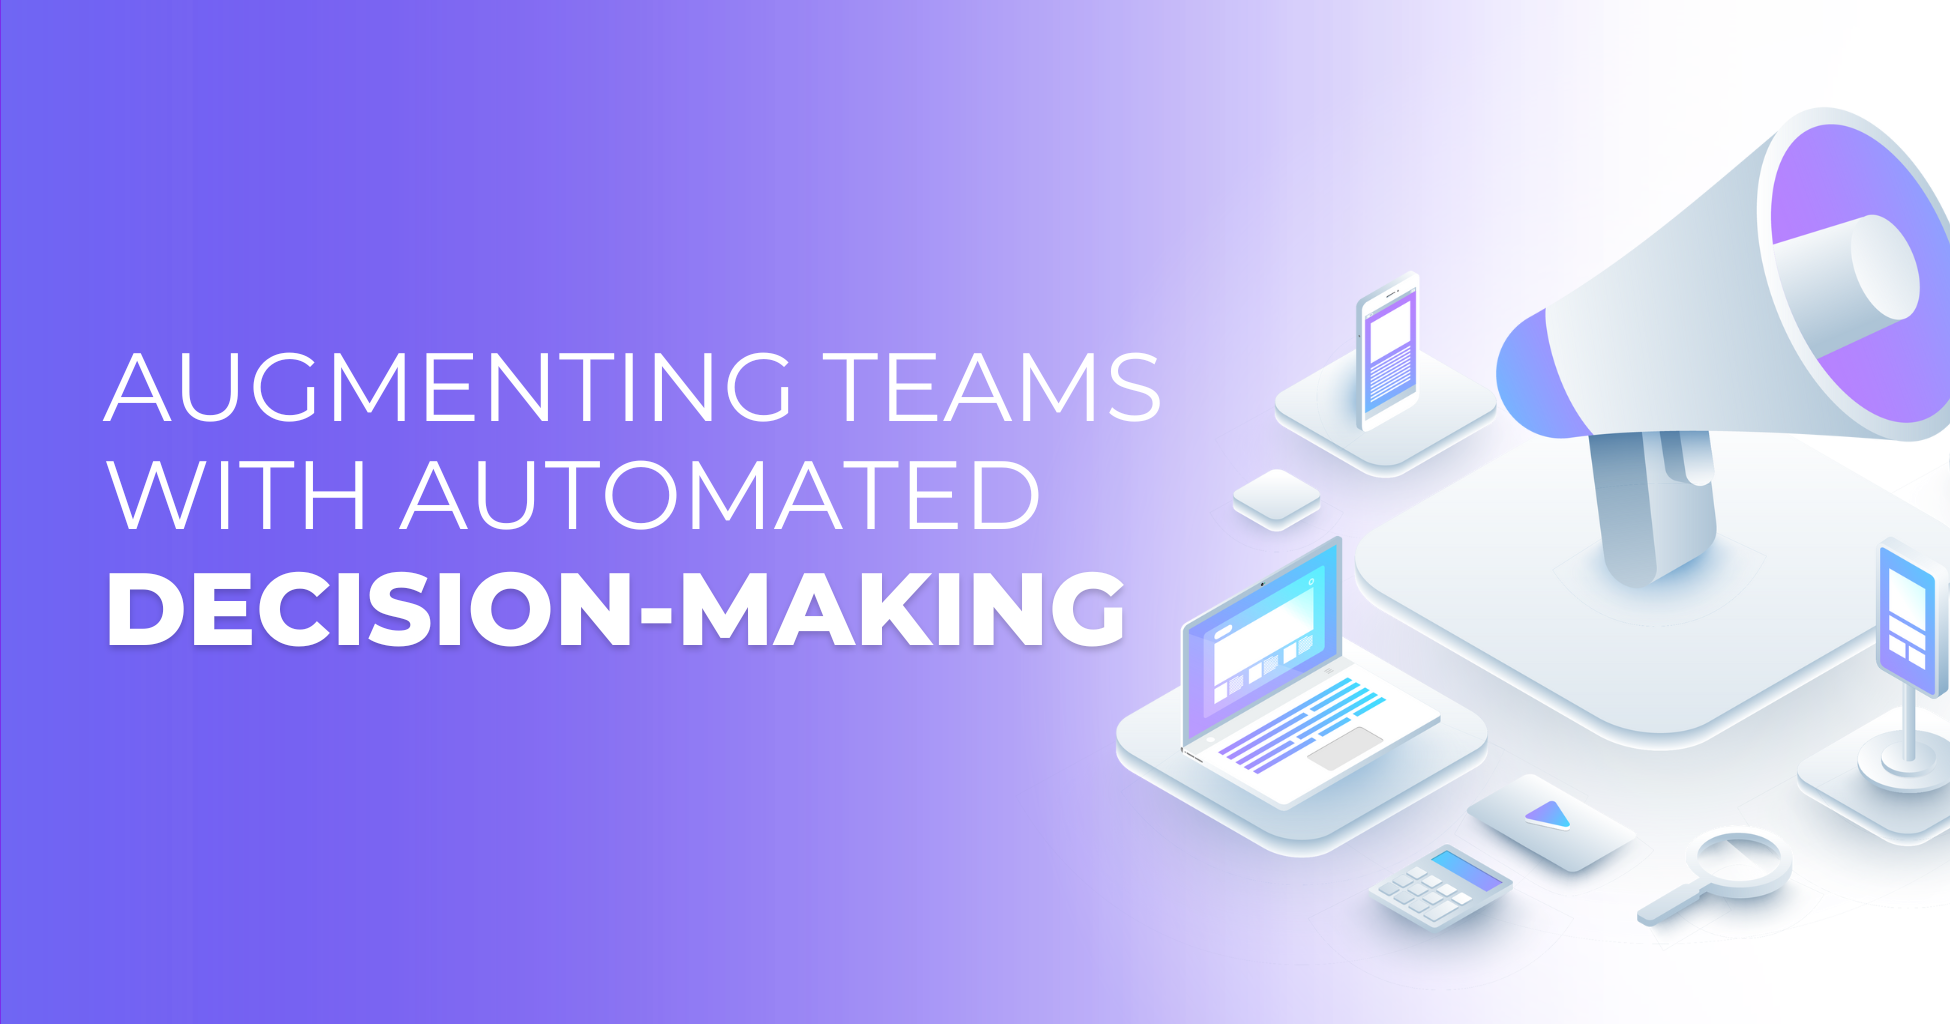 Augmenting Teams with Automated Decision-Making